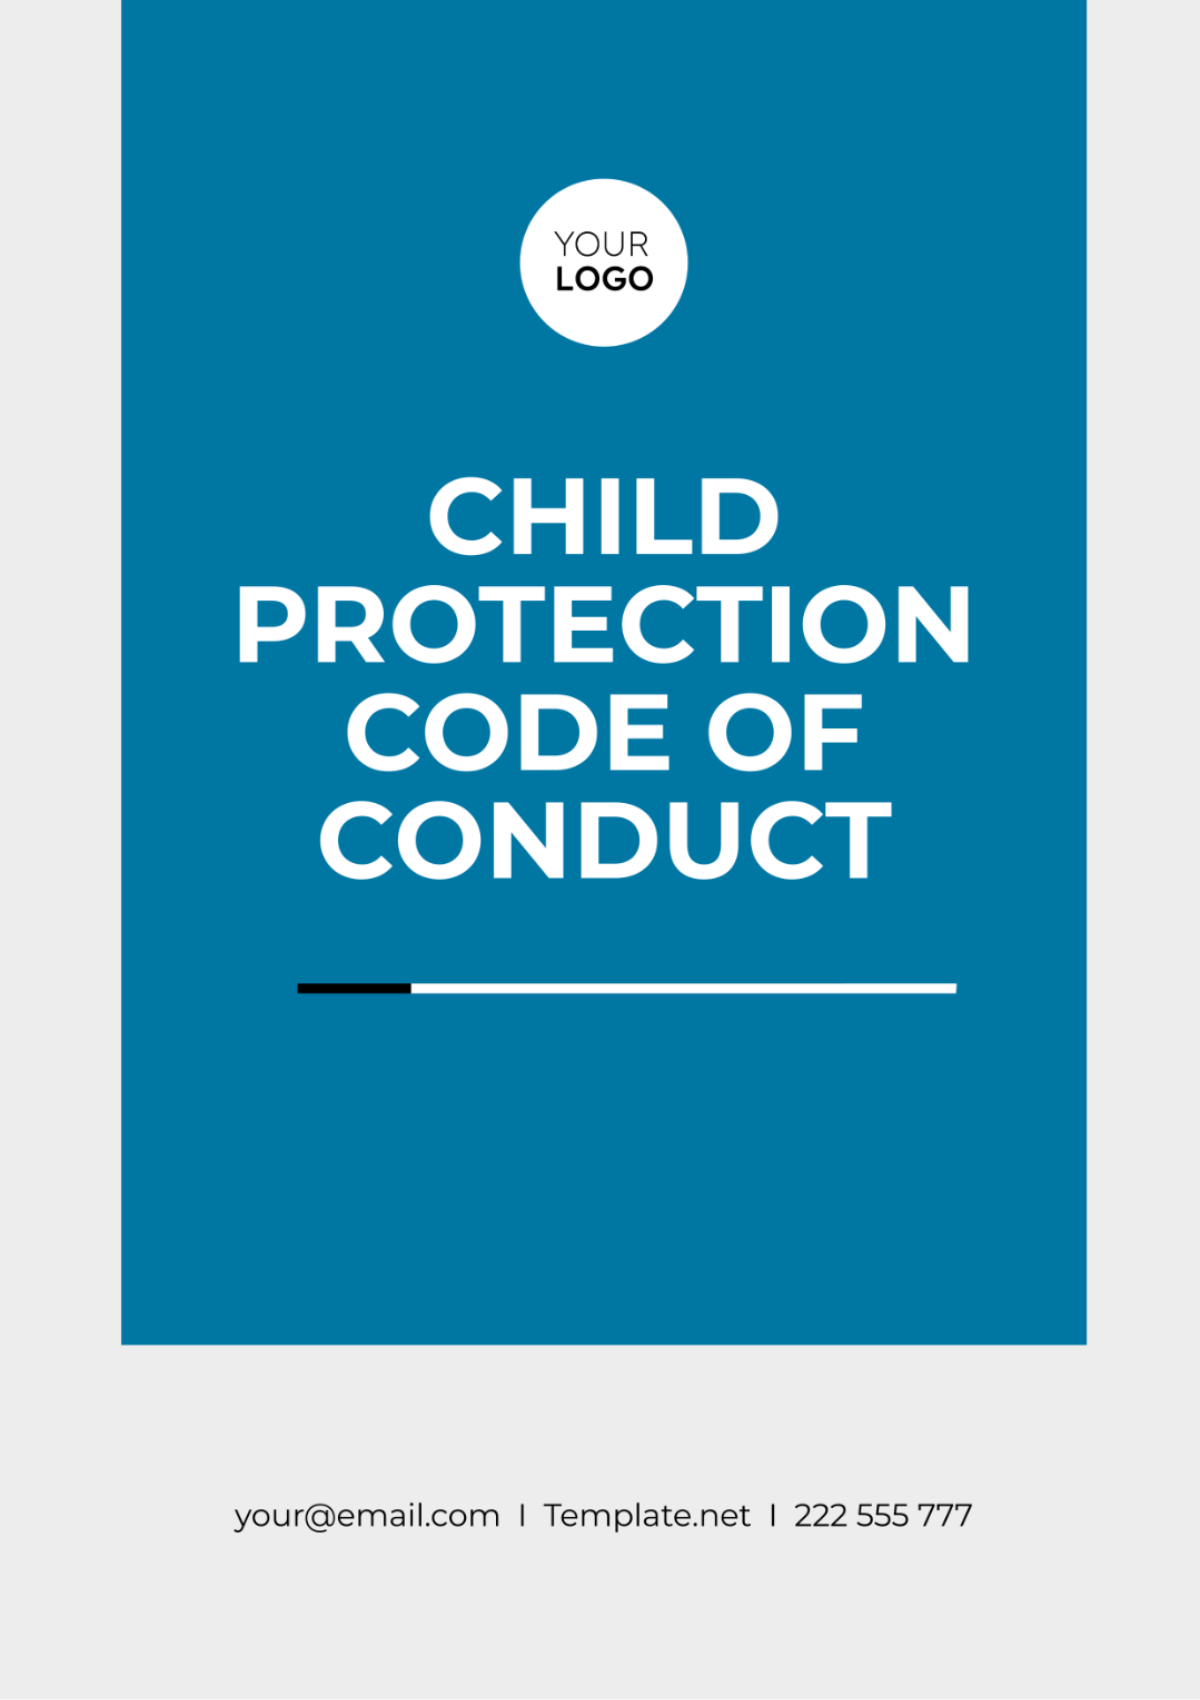 Child Protection Code of Conduct Template